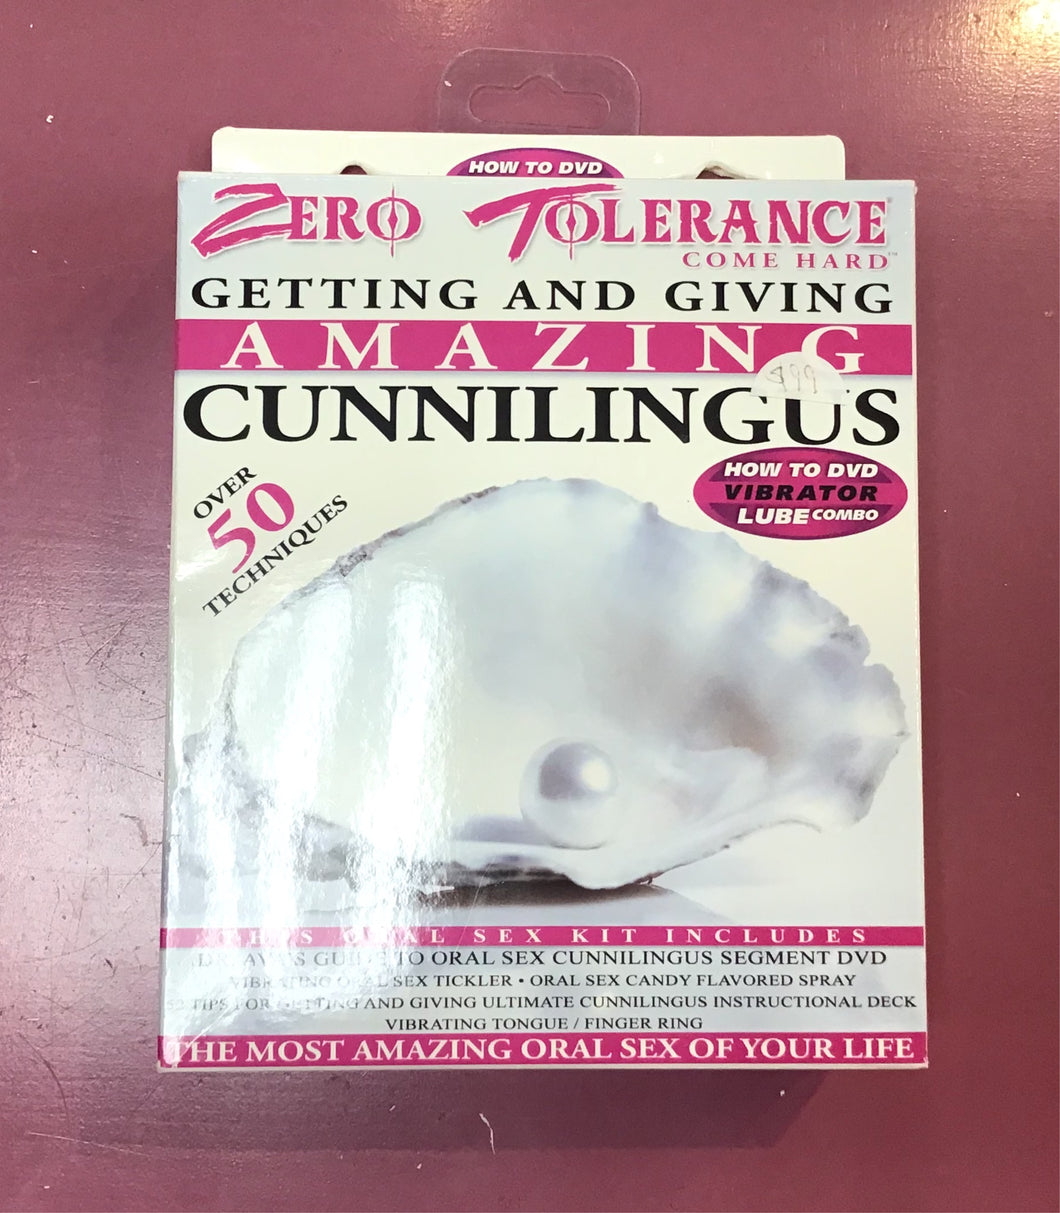 Zero Tolerance Toys Come Hard Getting and Giving Amazing Cunnilingus Kit * SALE ITEM *